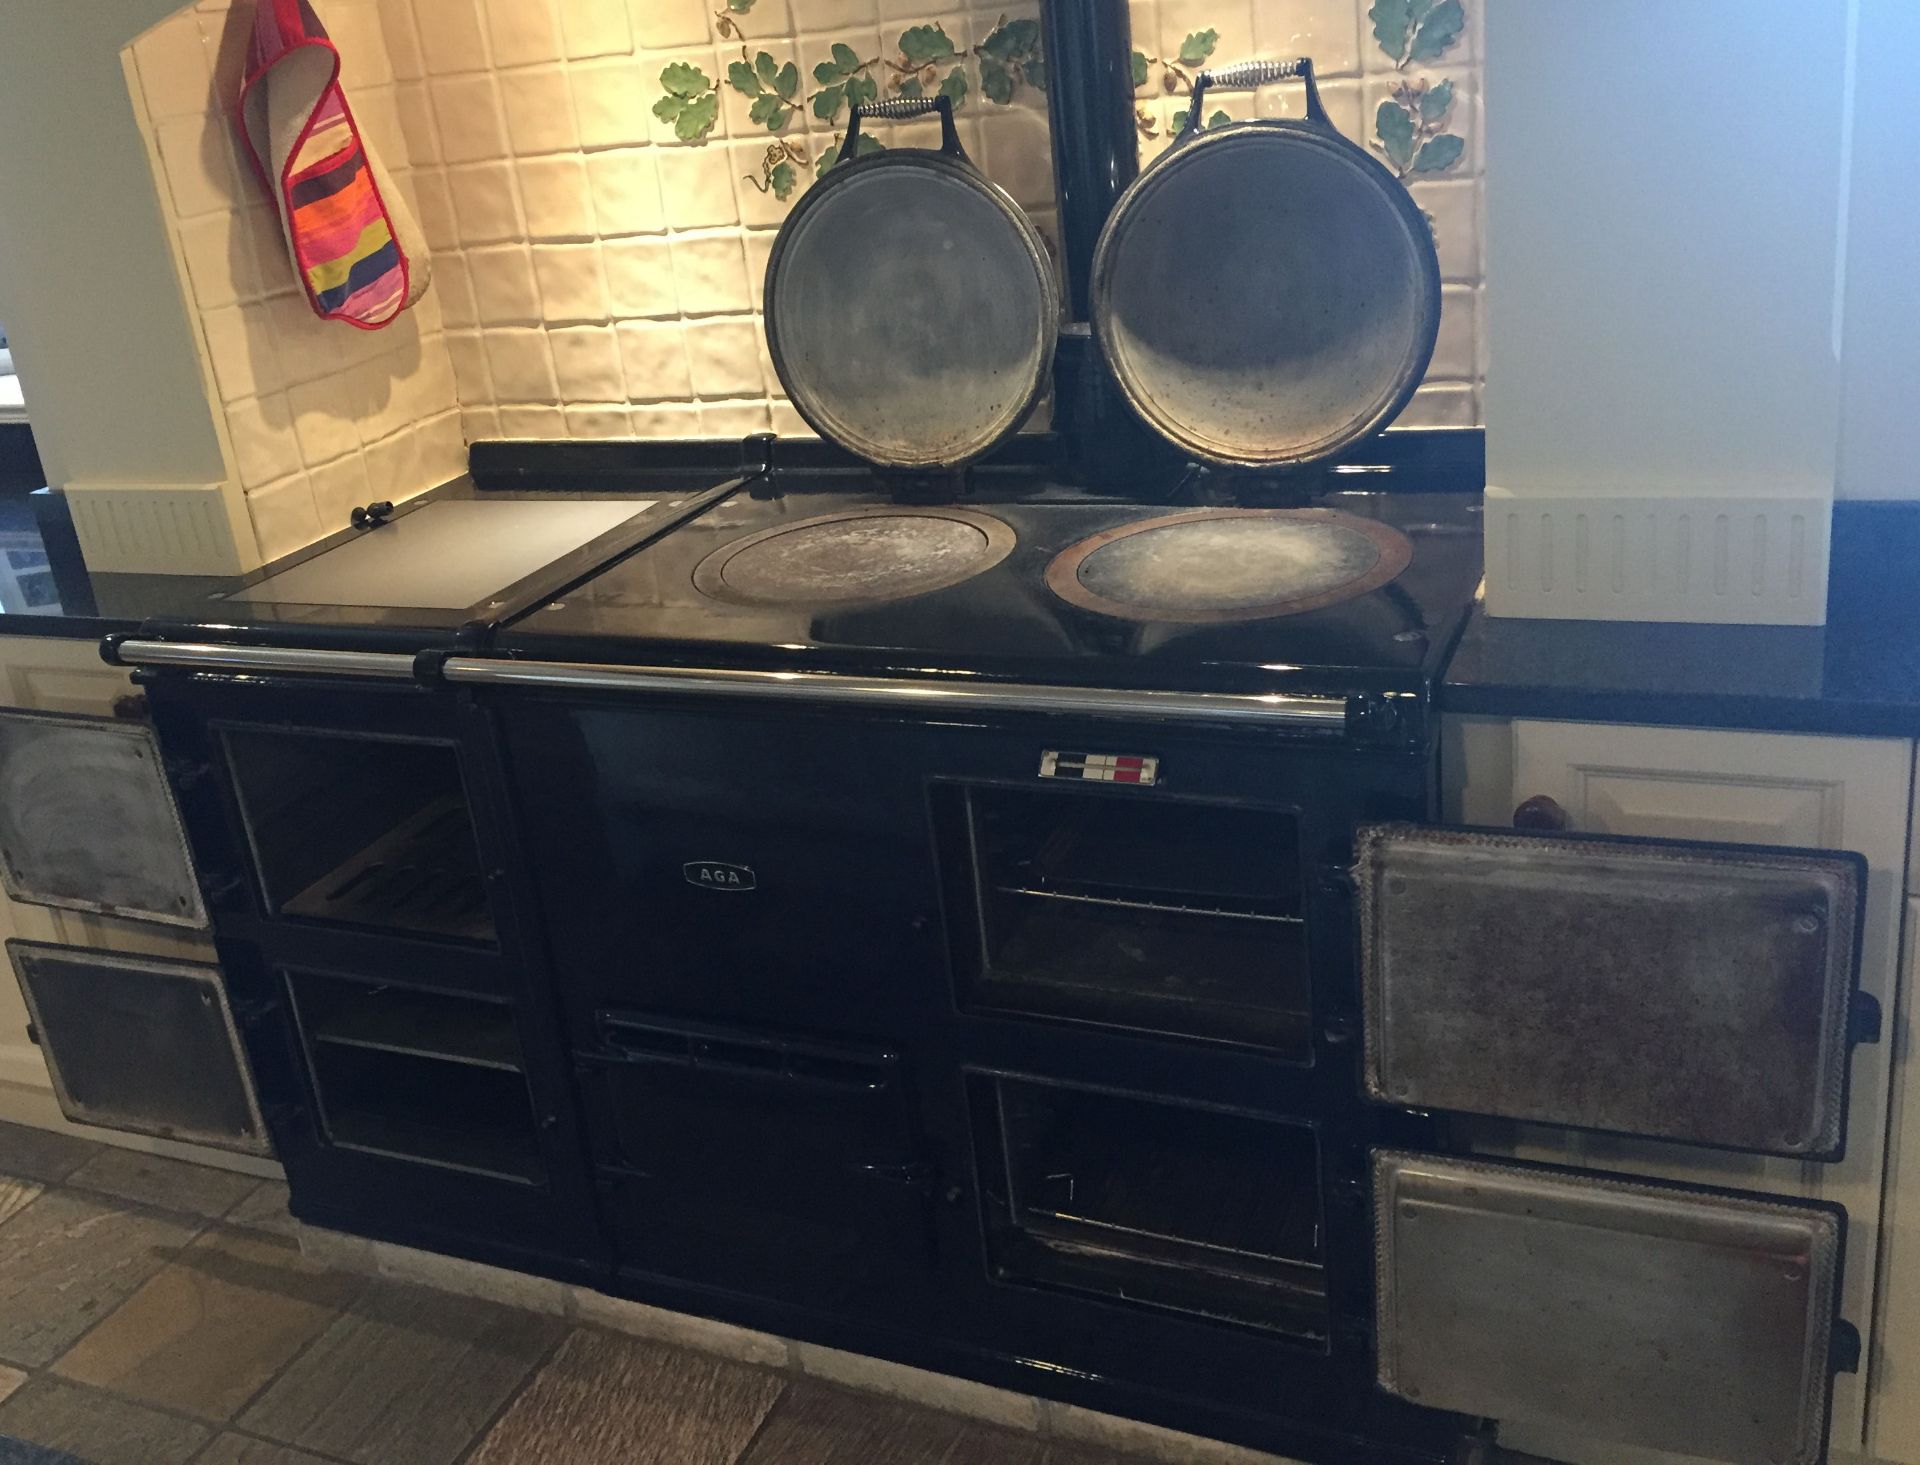 1 x Aga 4-Oven, 3-Plate Dual-Fuel Range Cooker - Cast Iron With Navy Enamel Finish With A Black - Image 9 of 21